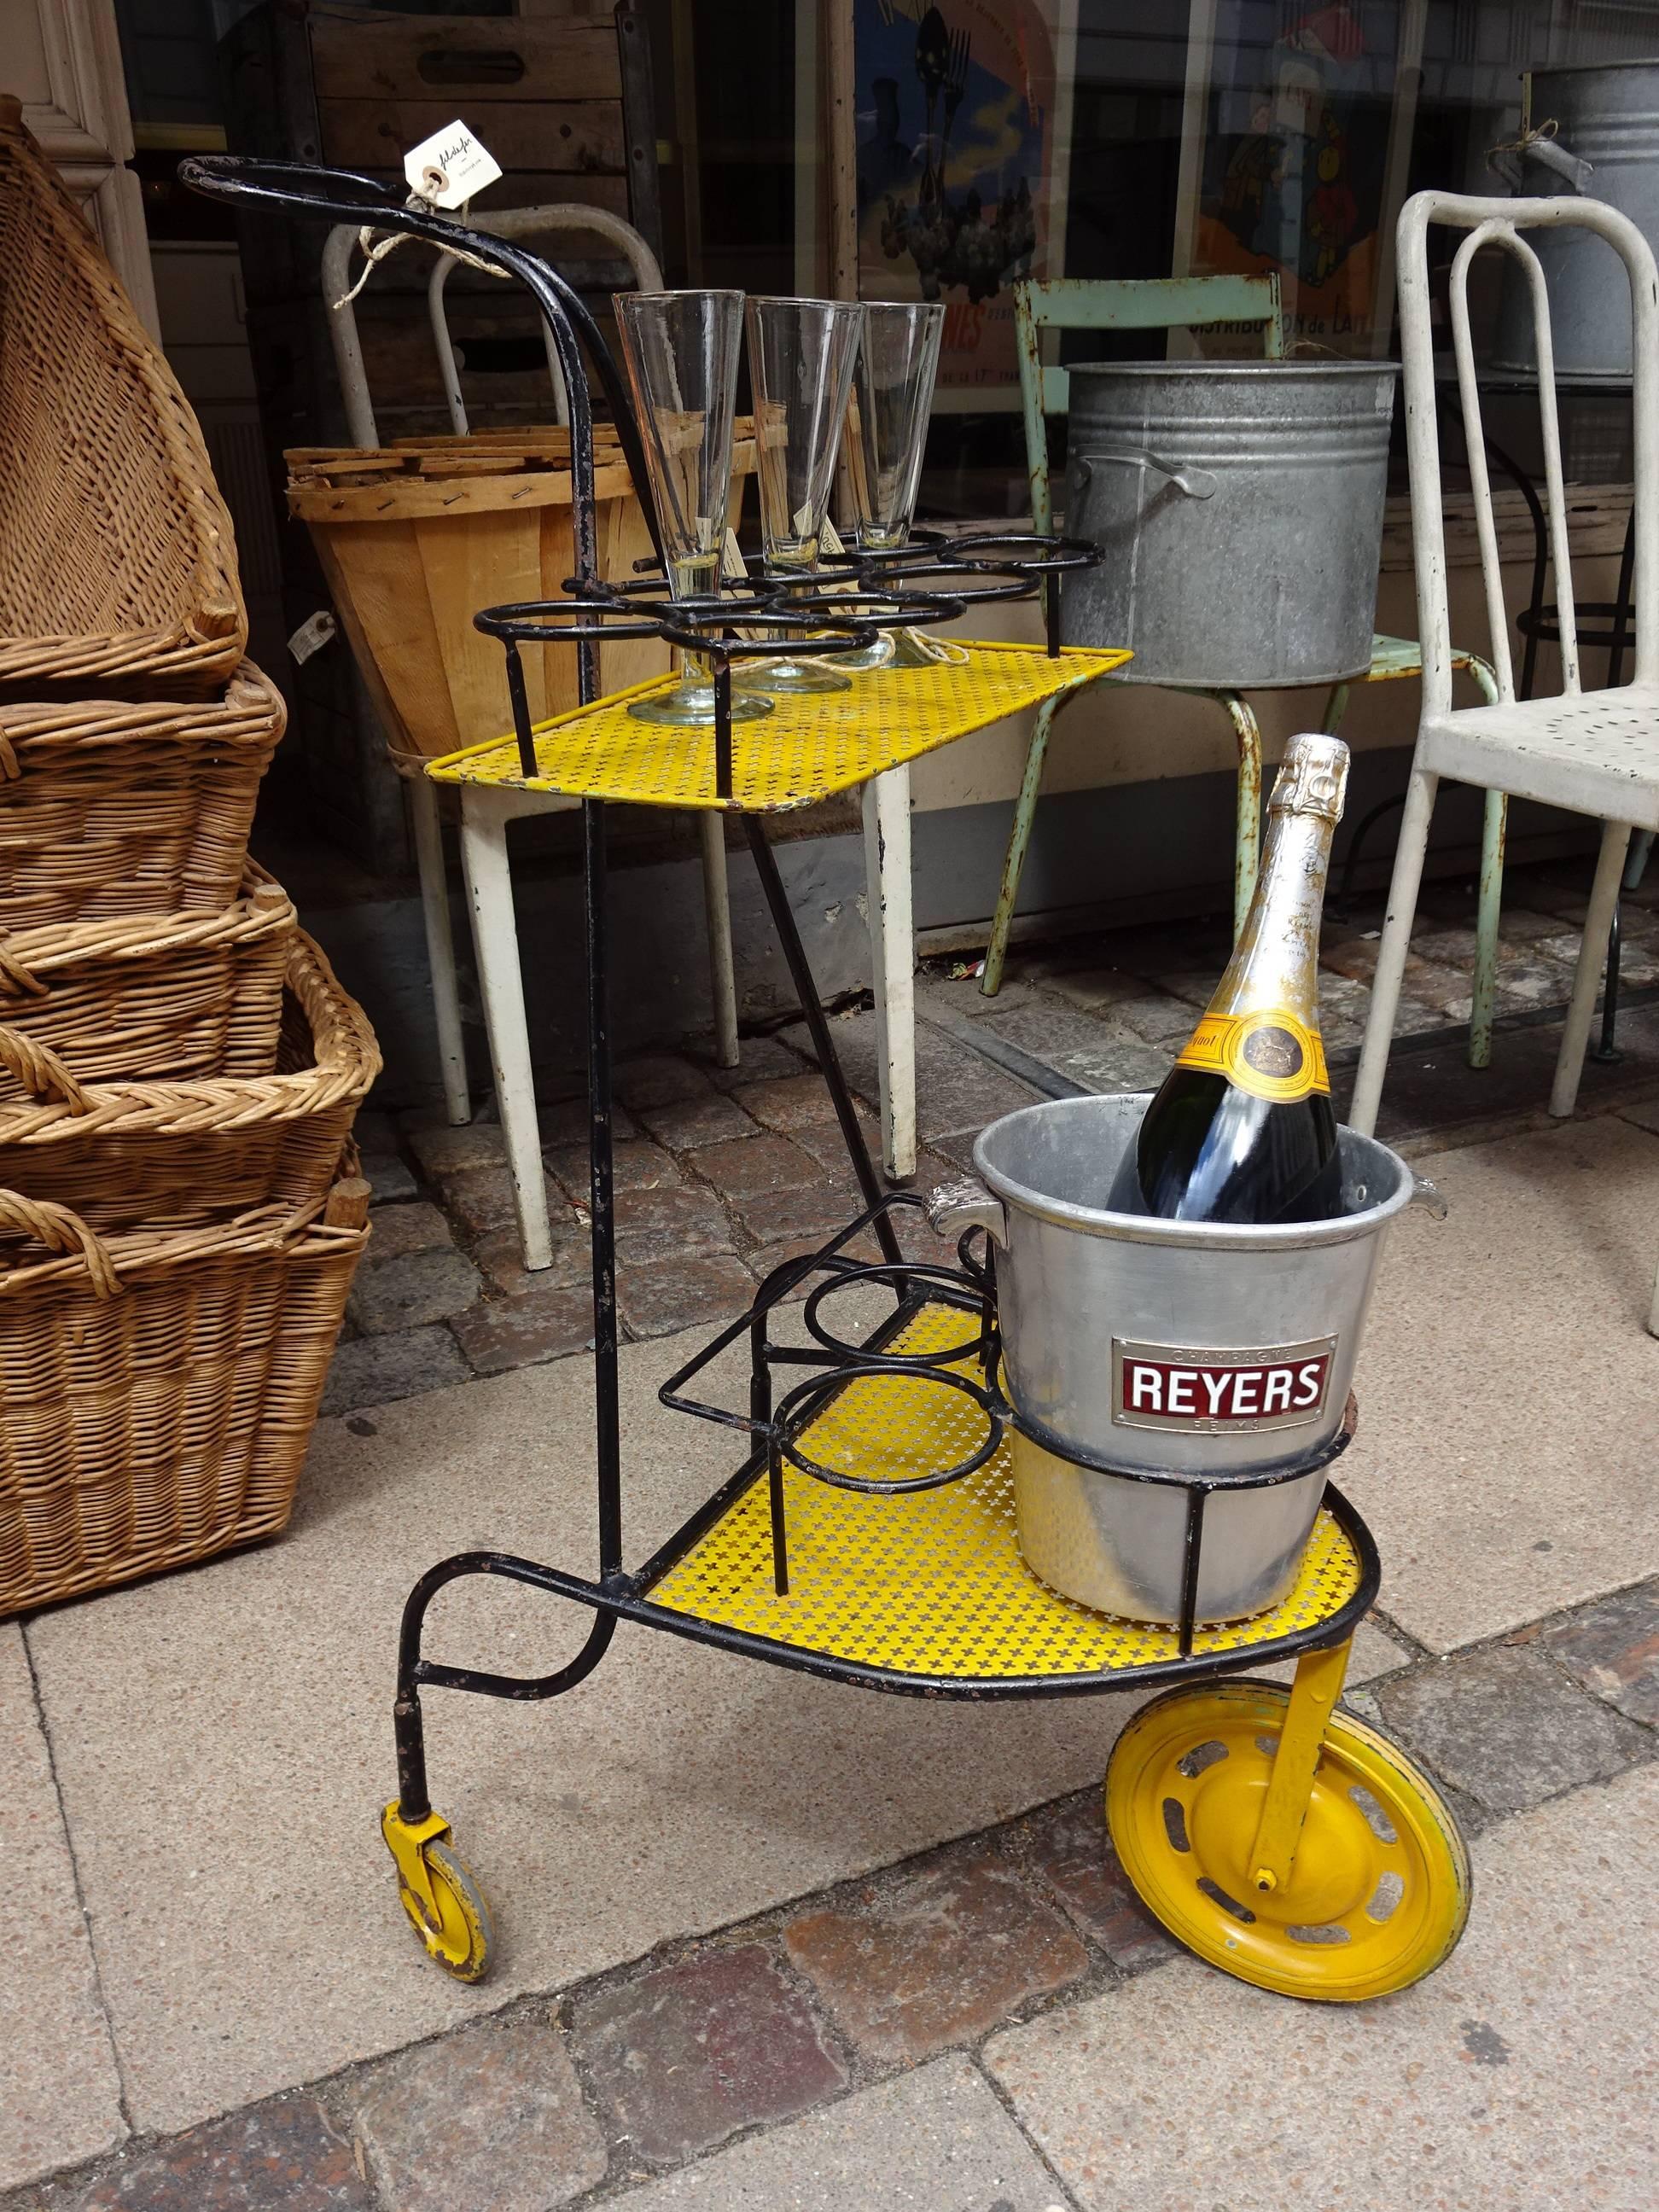 Fabulous black and yellow vintage Matégot style trolley / bar trolley. Designed in the 1950s and has two perforated metal yellow trays to store the ice bucket, bottles and glasses. Super look.